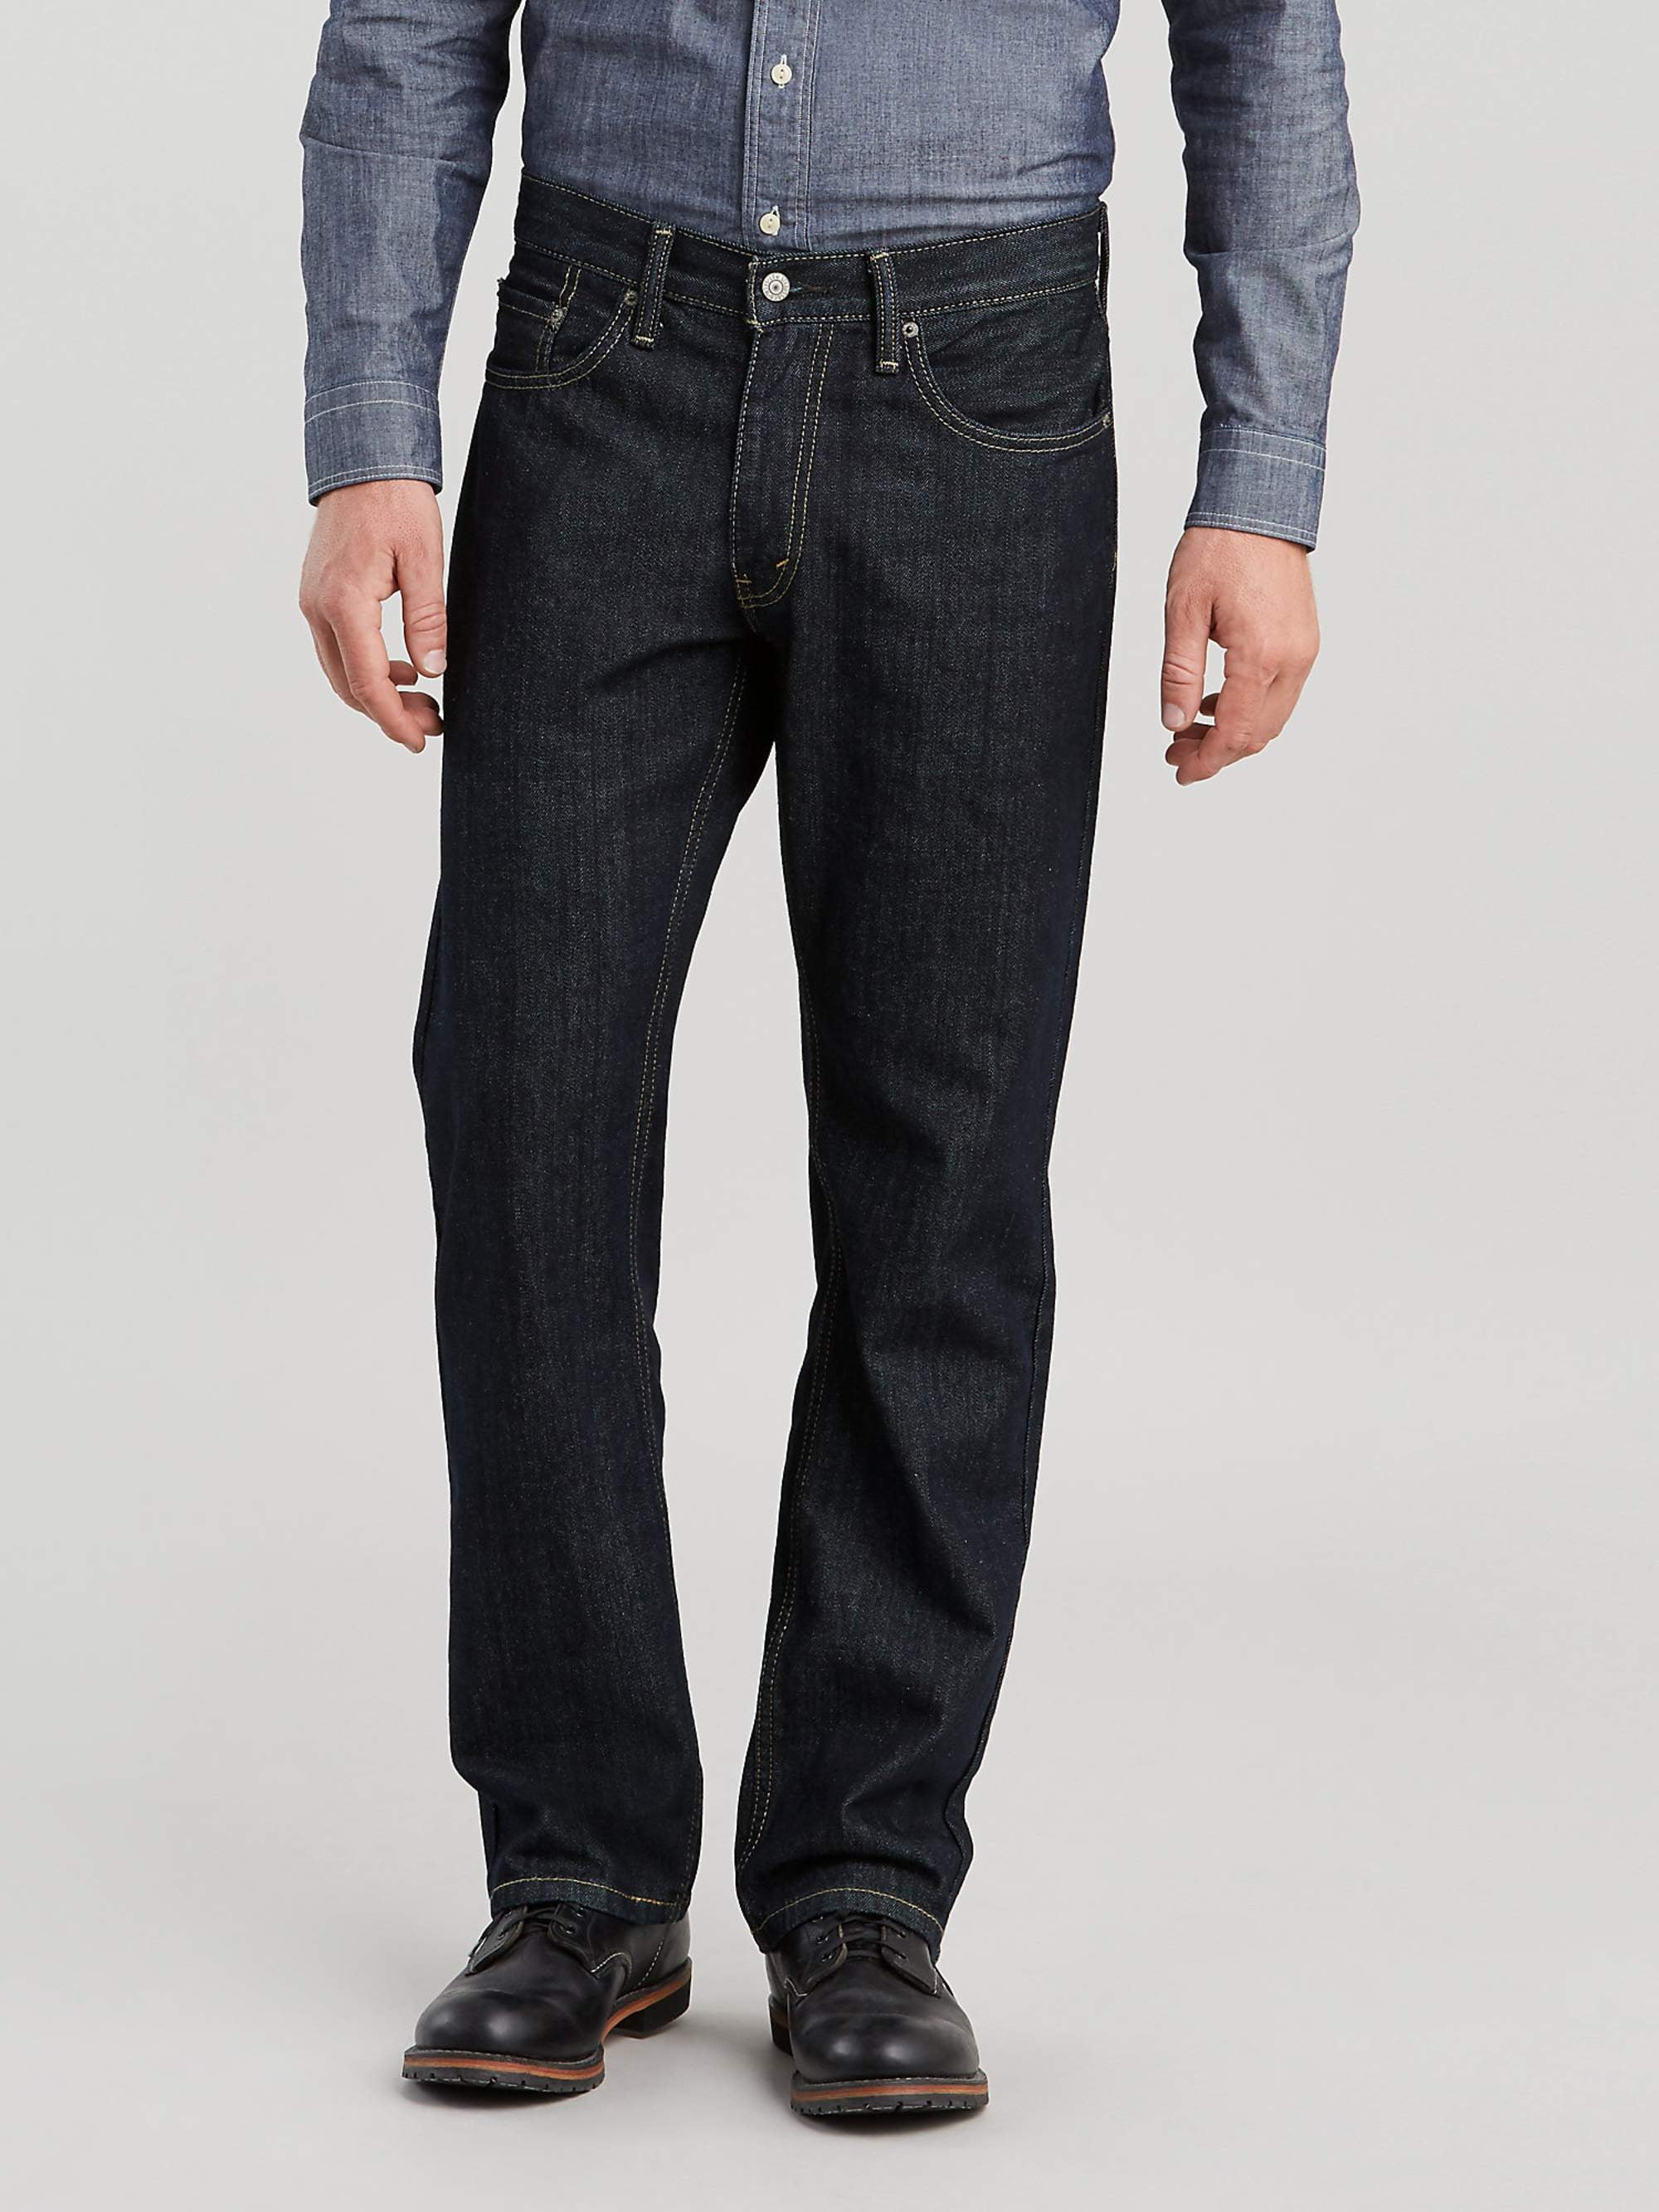 Heart move low price Good store good products Levi's Mens 559 Relaxed